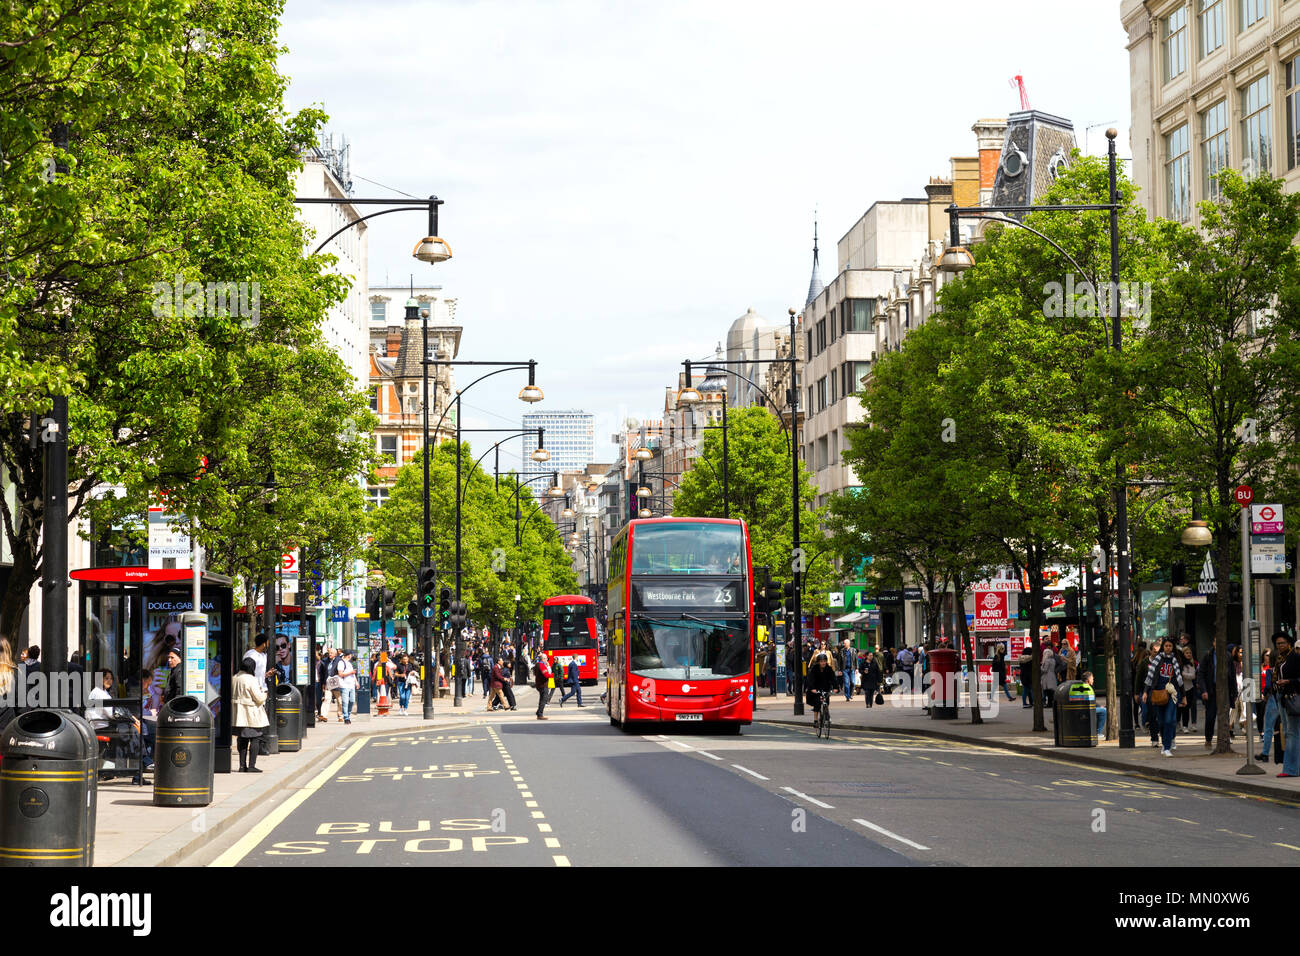 Buses going up and down the busy shopping street in central London - Oxford Street, London, UK Stock Photo